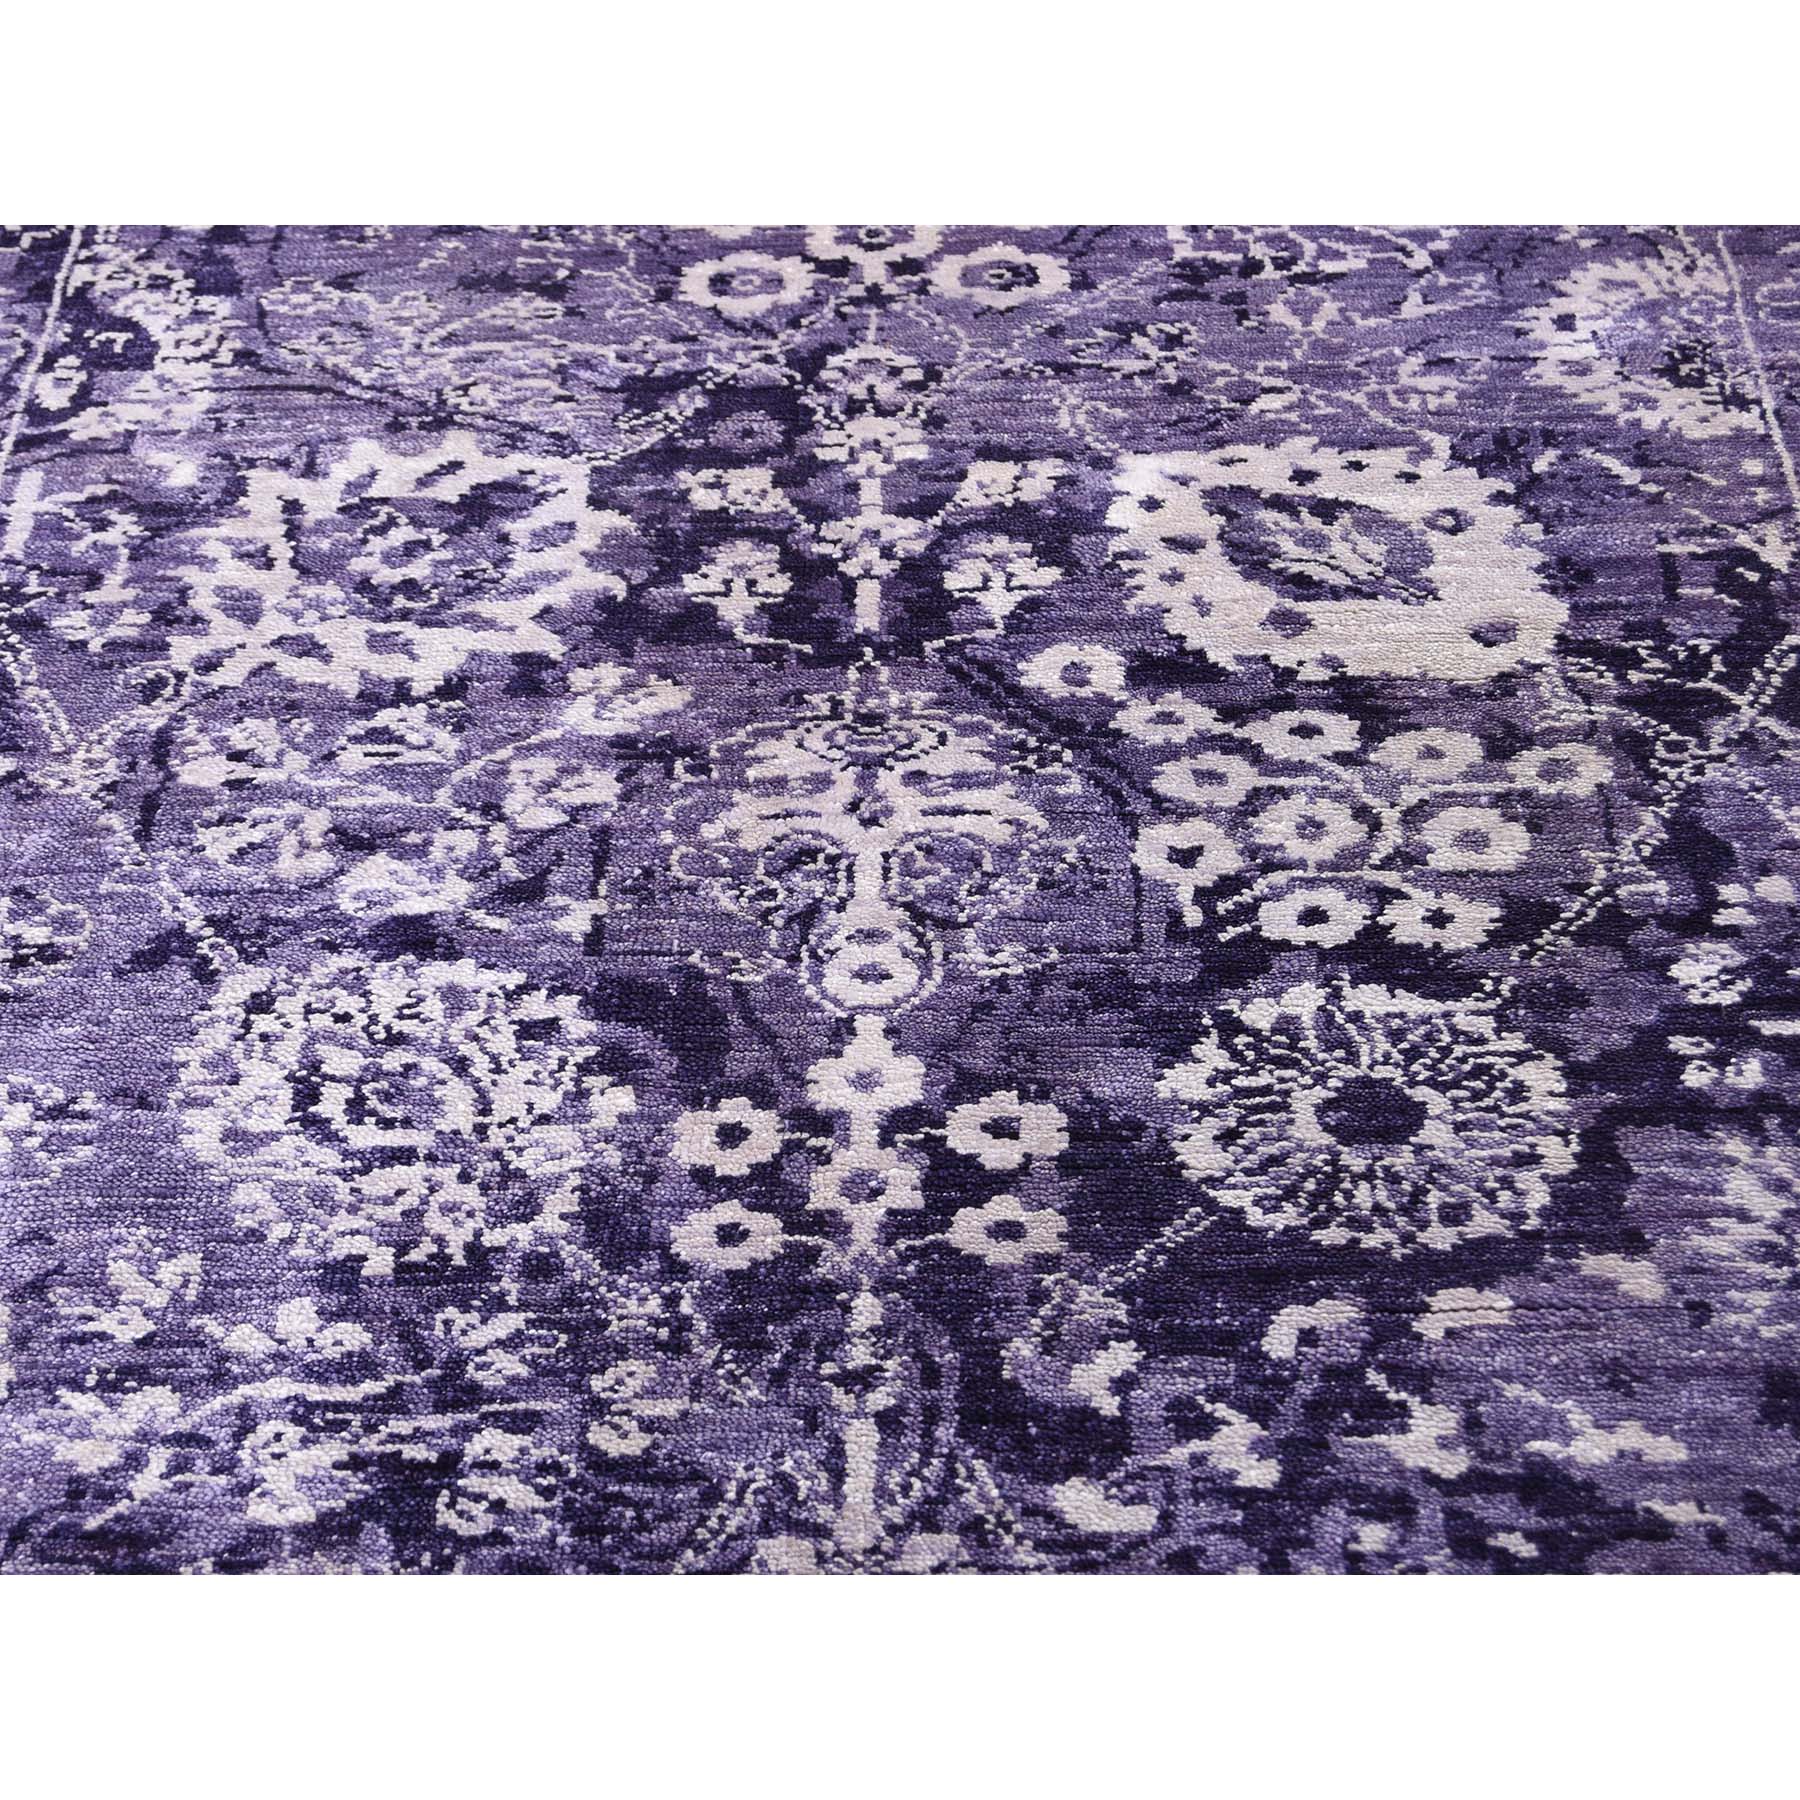 4-10 x6-8  Transitional Purple Tabriz Wool and Silk Hand-Knotted Oriental Rug 